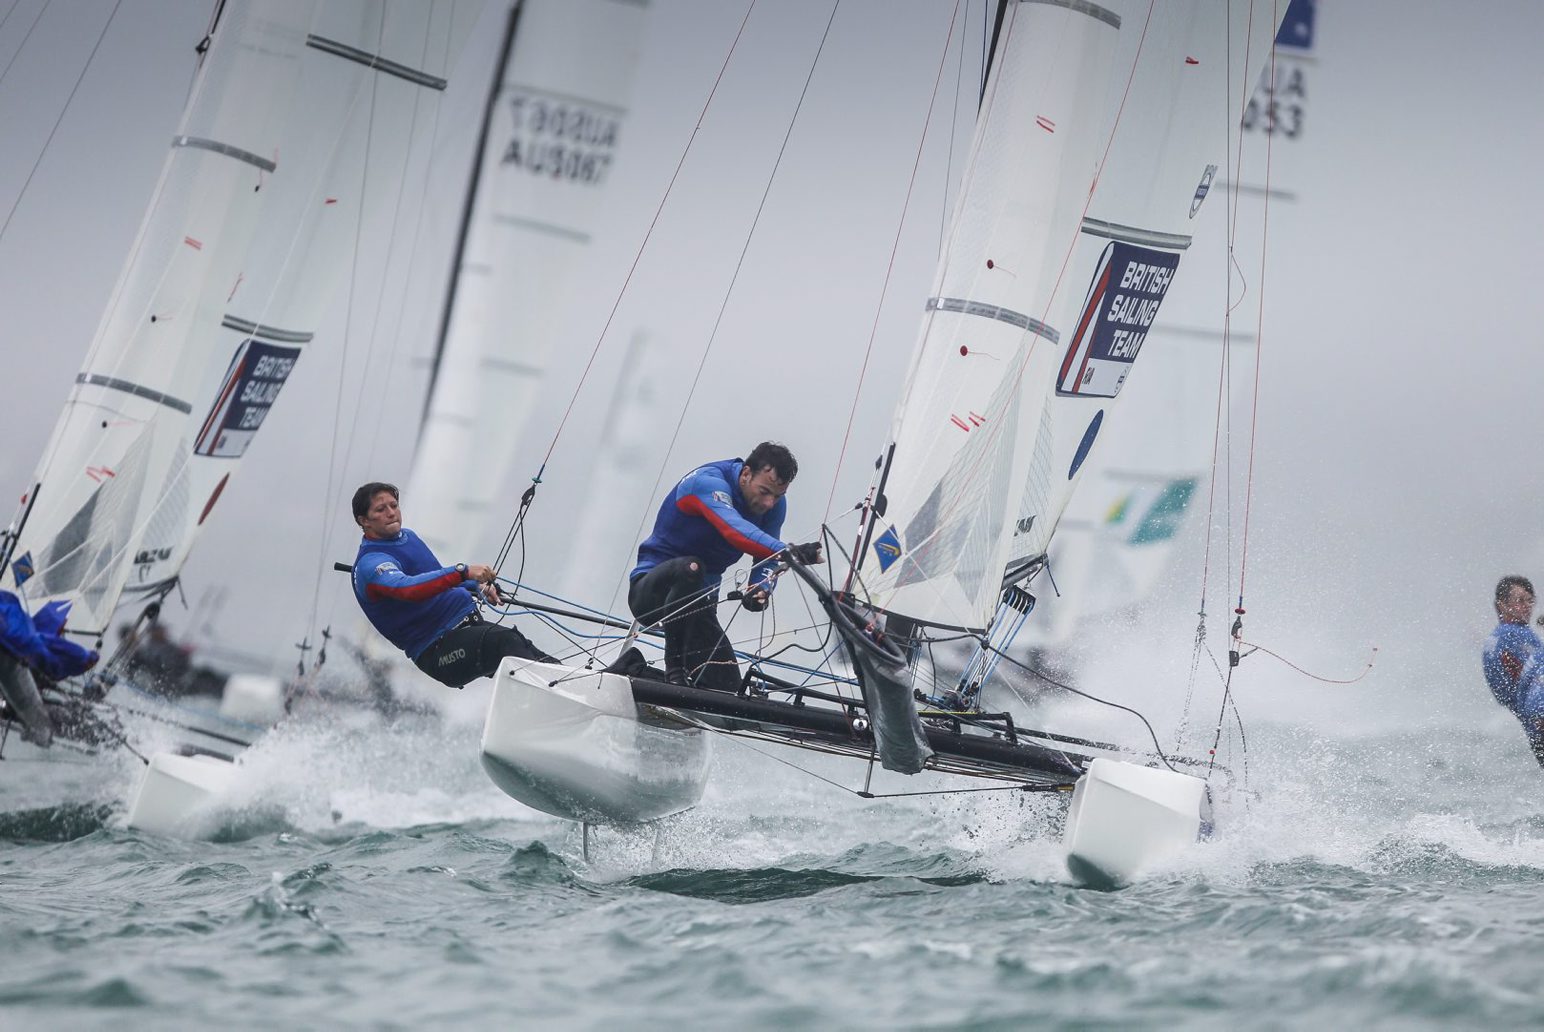 Lucy Macgregor and Tom Phipps in the Nacra 17 